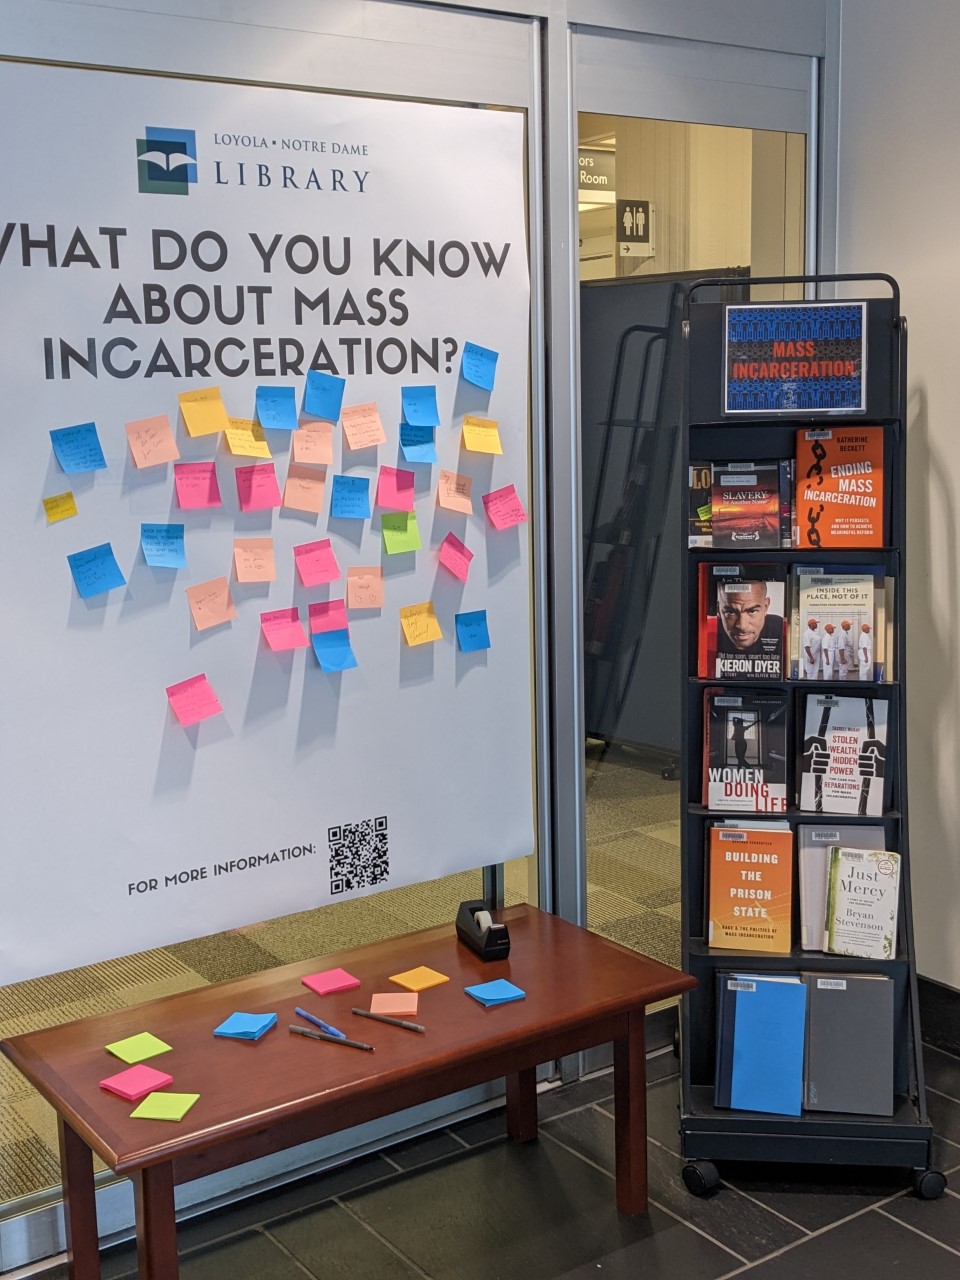 The library's exhibit and book display on the topic of mass incarceration. A large poster on the left reads 'What do you know about mass incarceration?' About two dozen post it notes filled out by patrons are stuck to the poster. To the right of the poster, a shelf displays a variety of books on the topic of mass incarceration. 